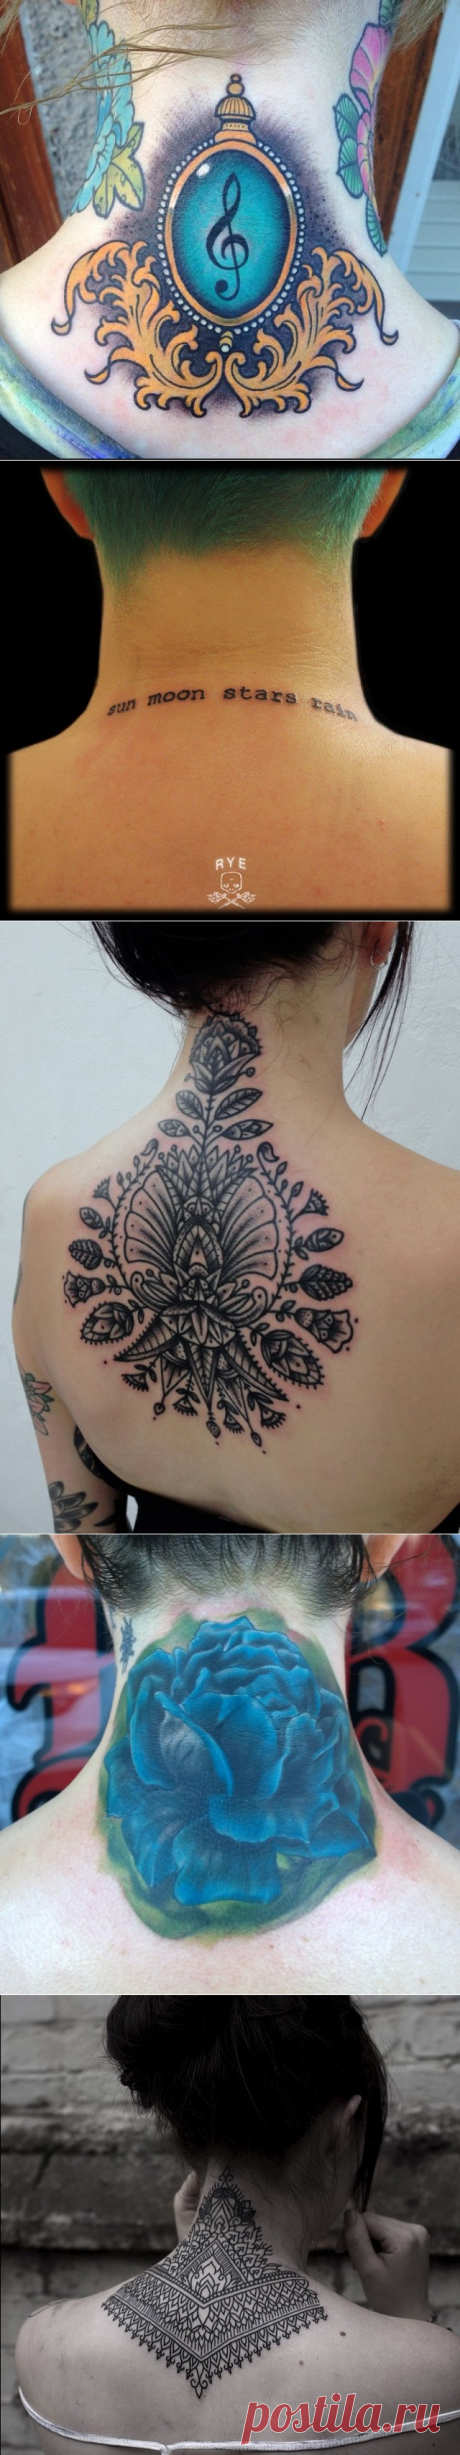 35 Awesome Back of the Neck Tattoo Designs - Choose Yours